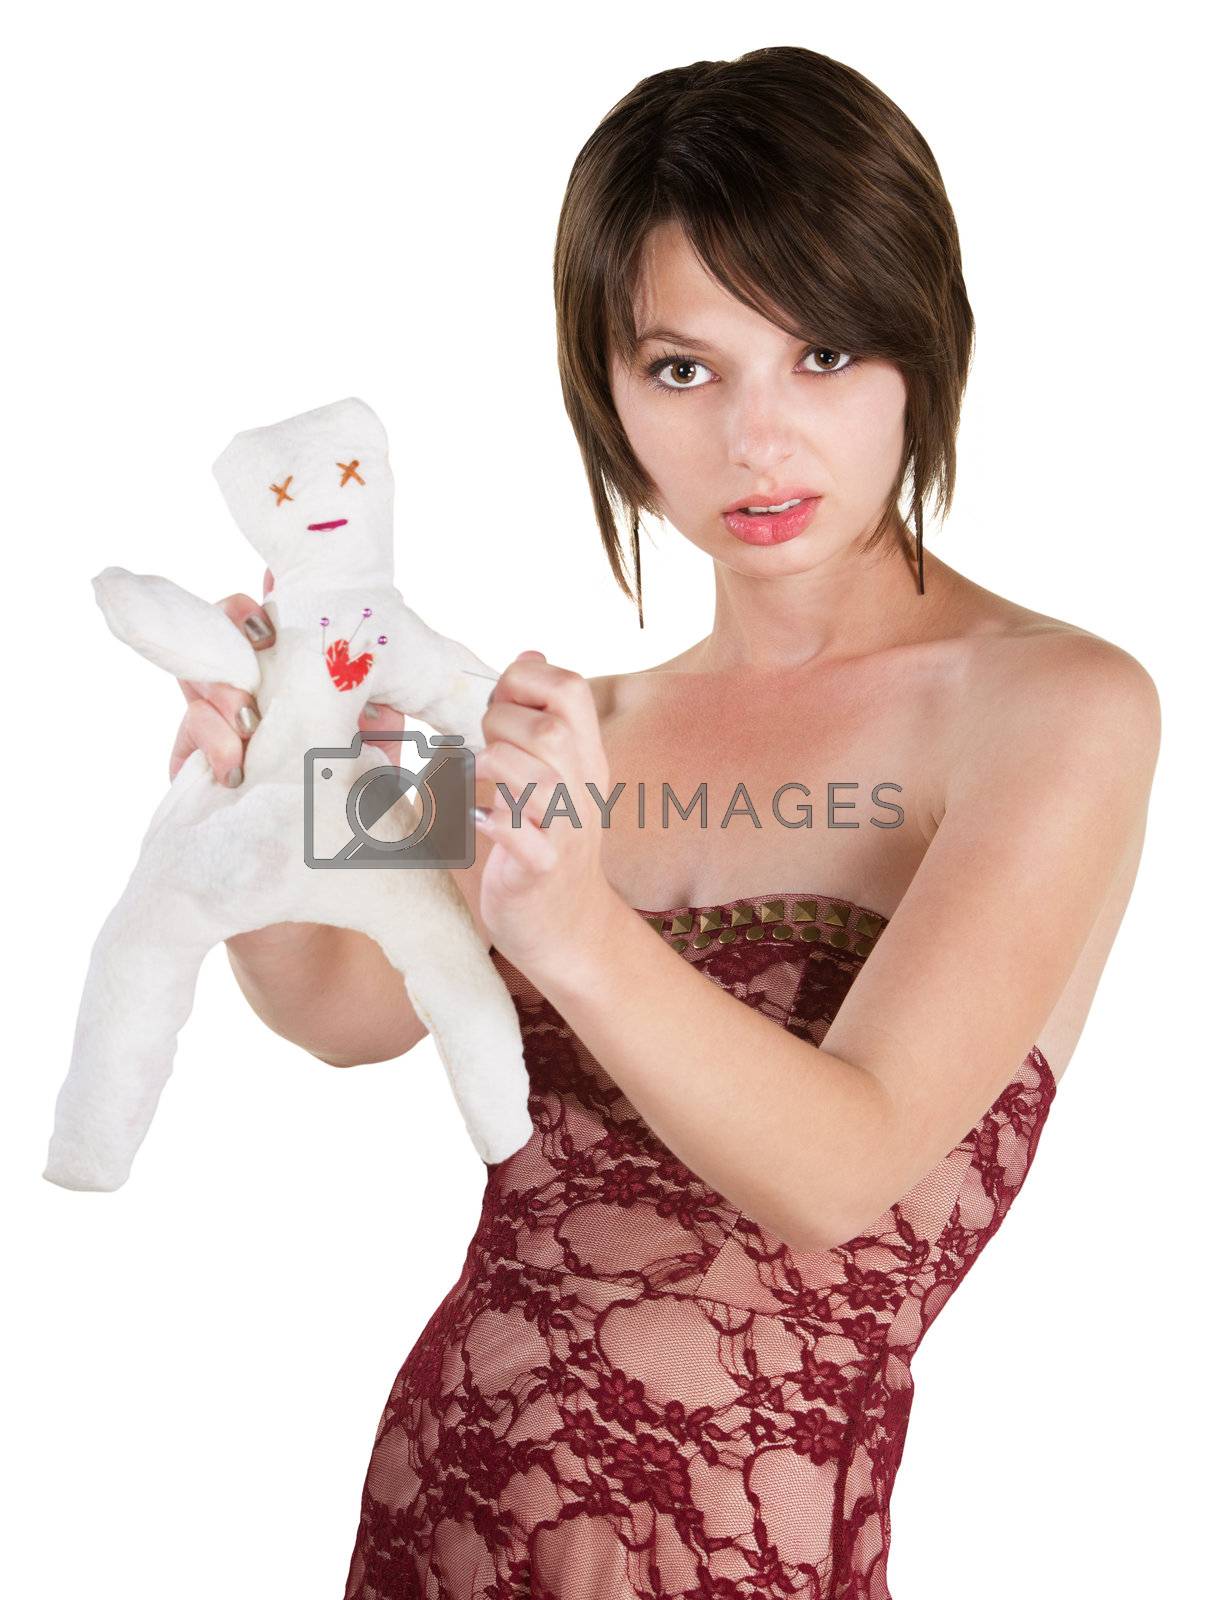 Royalty free image of Angry Lady with Voodoo Doll by Creatista